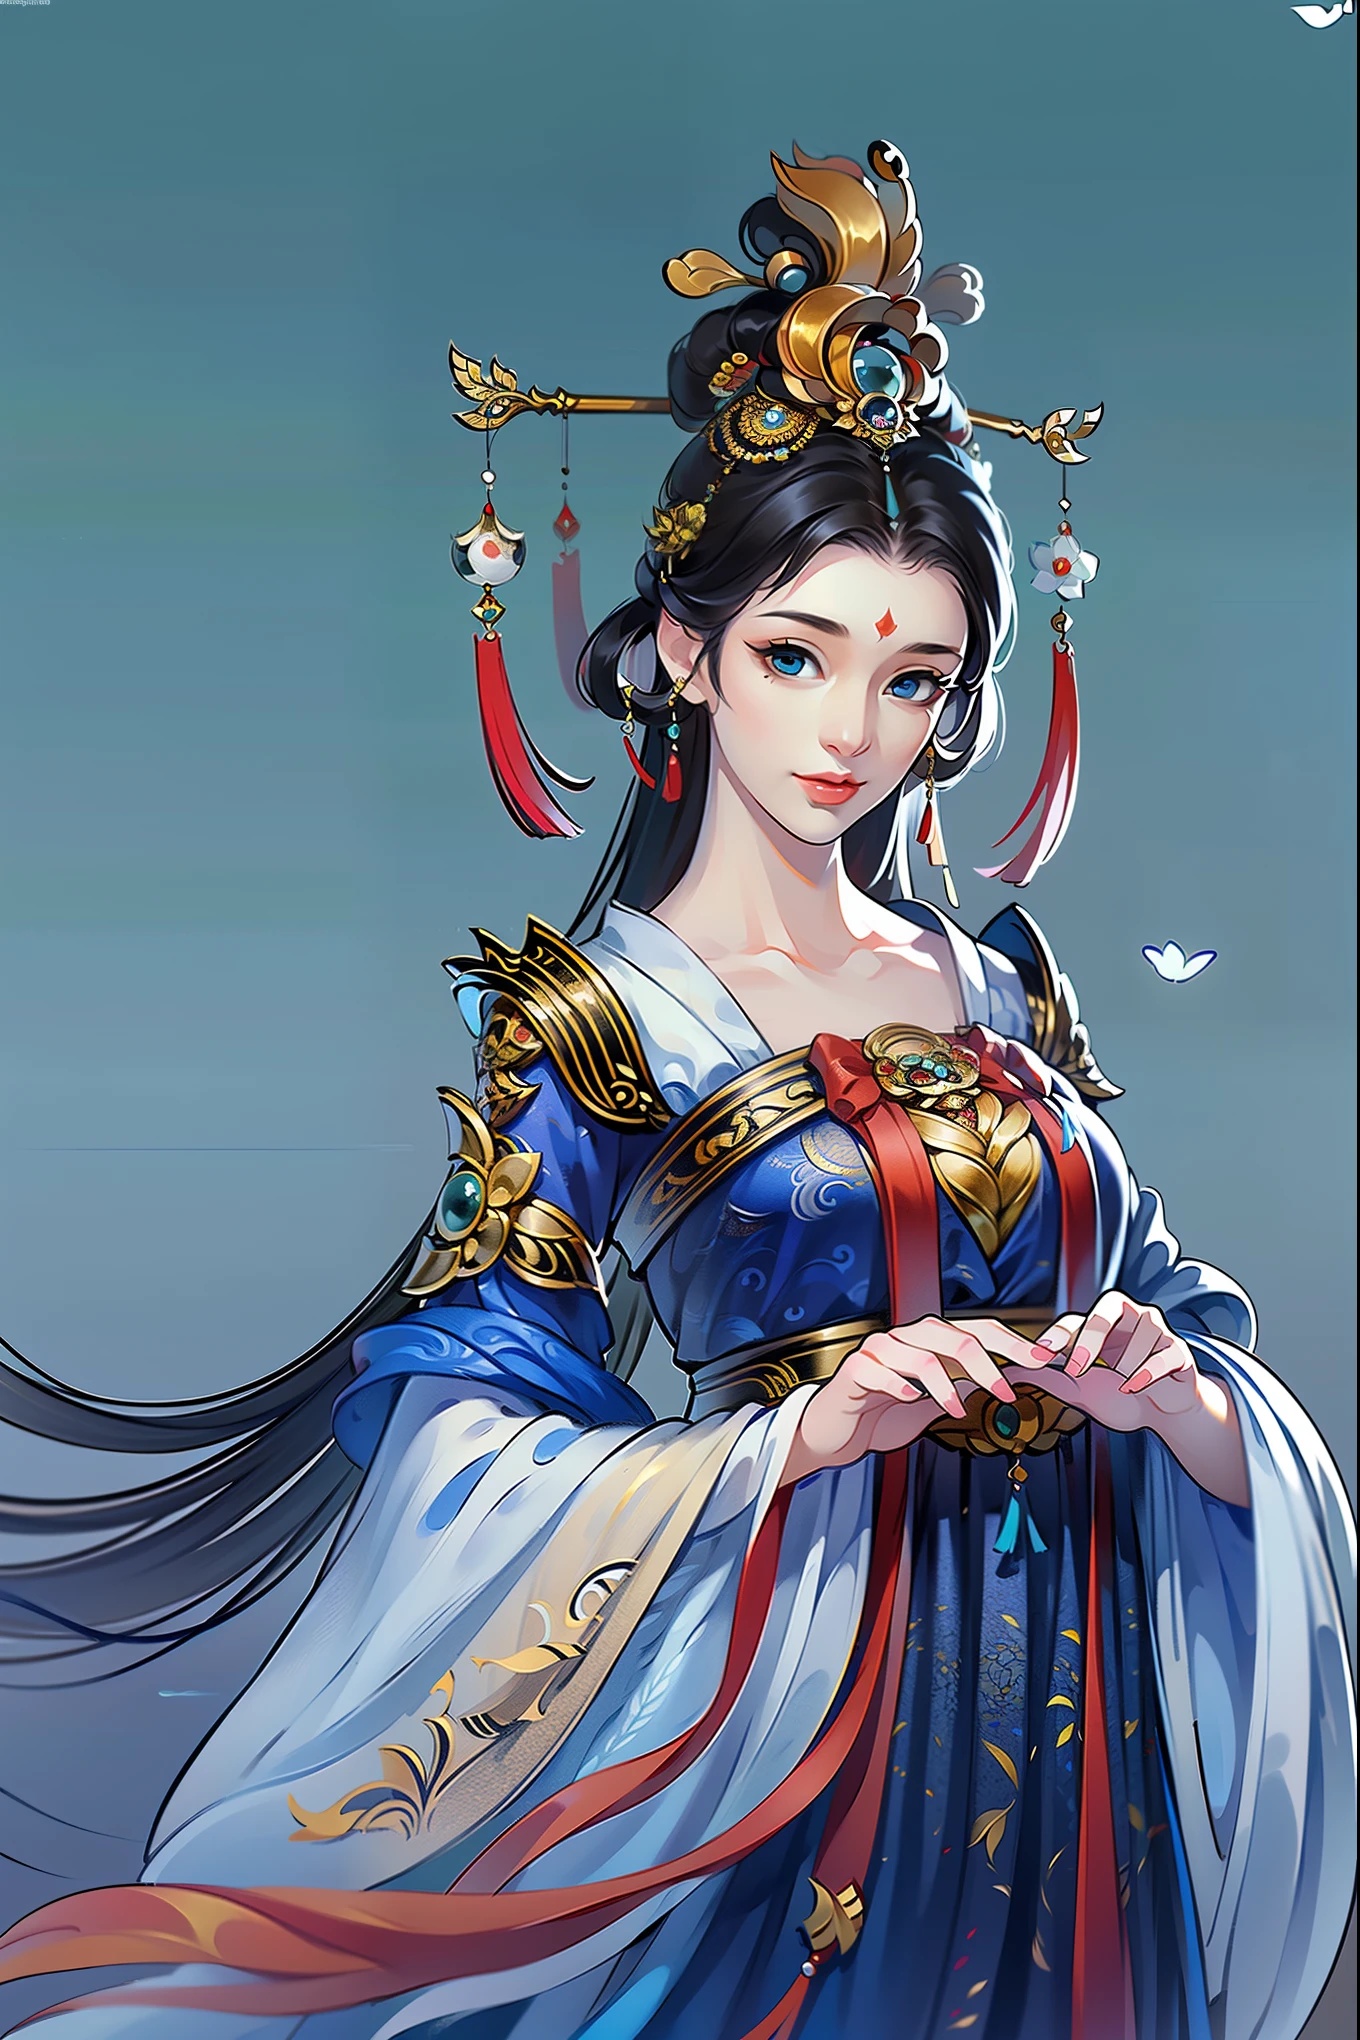 （masterpiece，super detailed，HD details，highly detailed art）1 girl，Half body，xianxia，blue，elegant，Highly detailed character designs from East Asia，Game character costume design，simple，ultra high resolution, sharp focus, epic work, masterpiece, (Very detailed CG unified 8k wallpaper)，pretty face，beautiful eyes，HD details